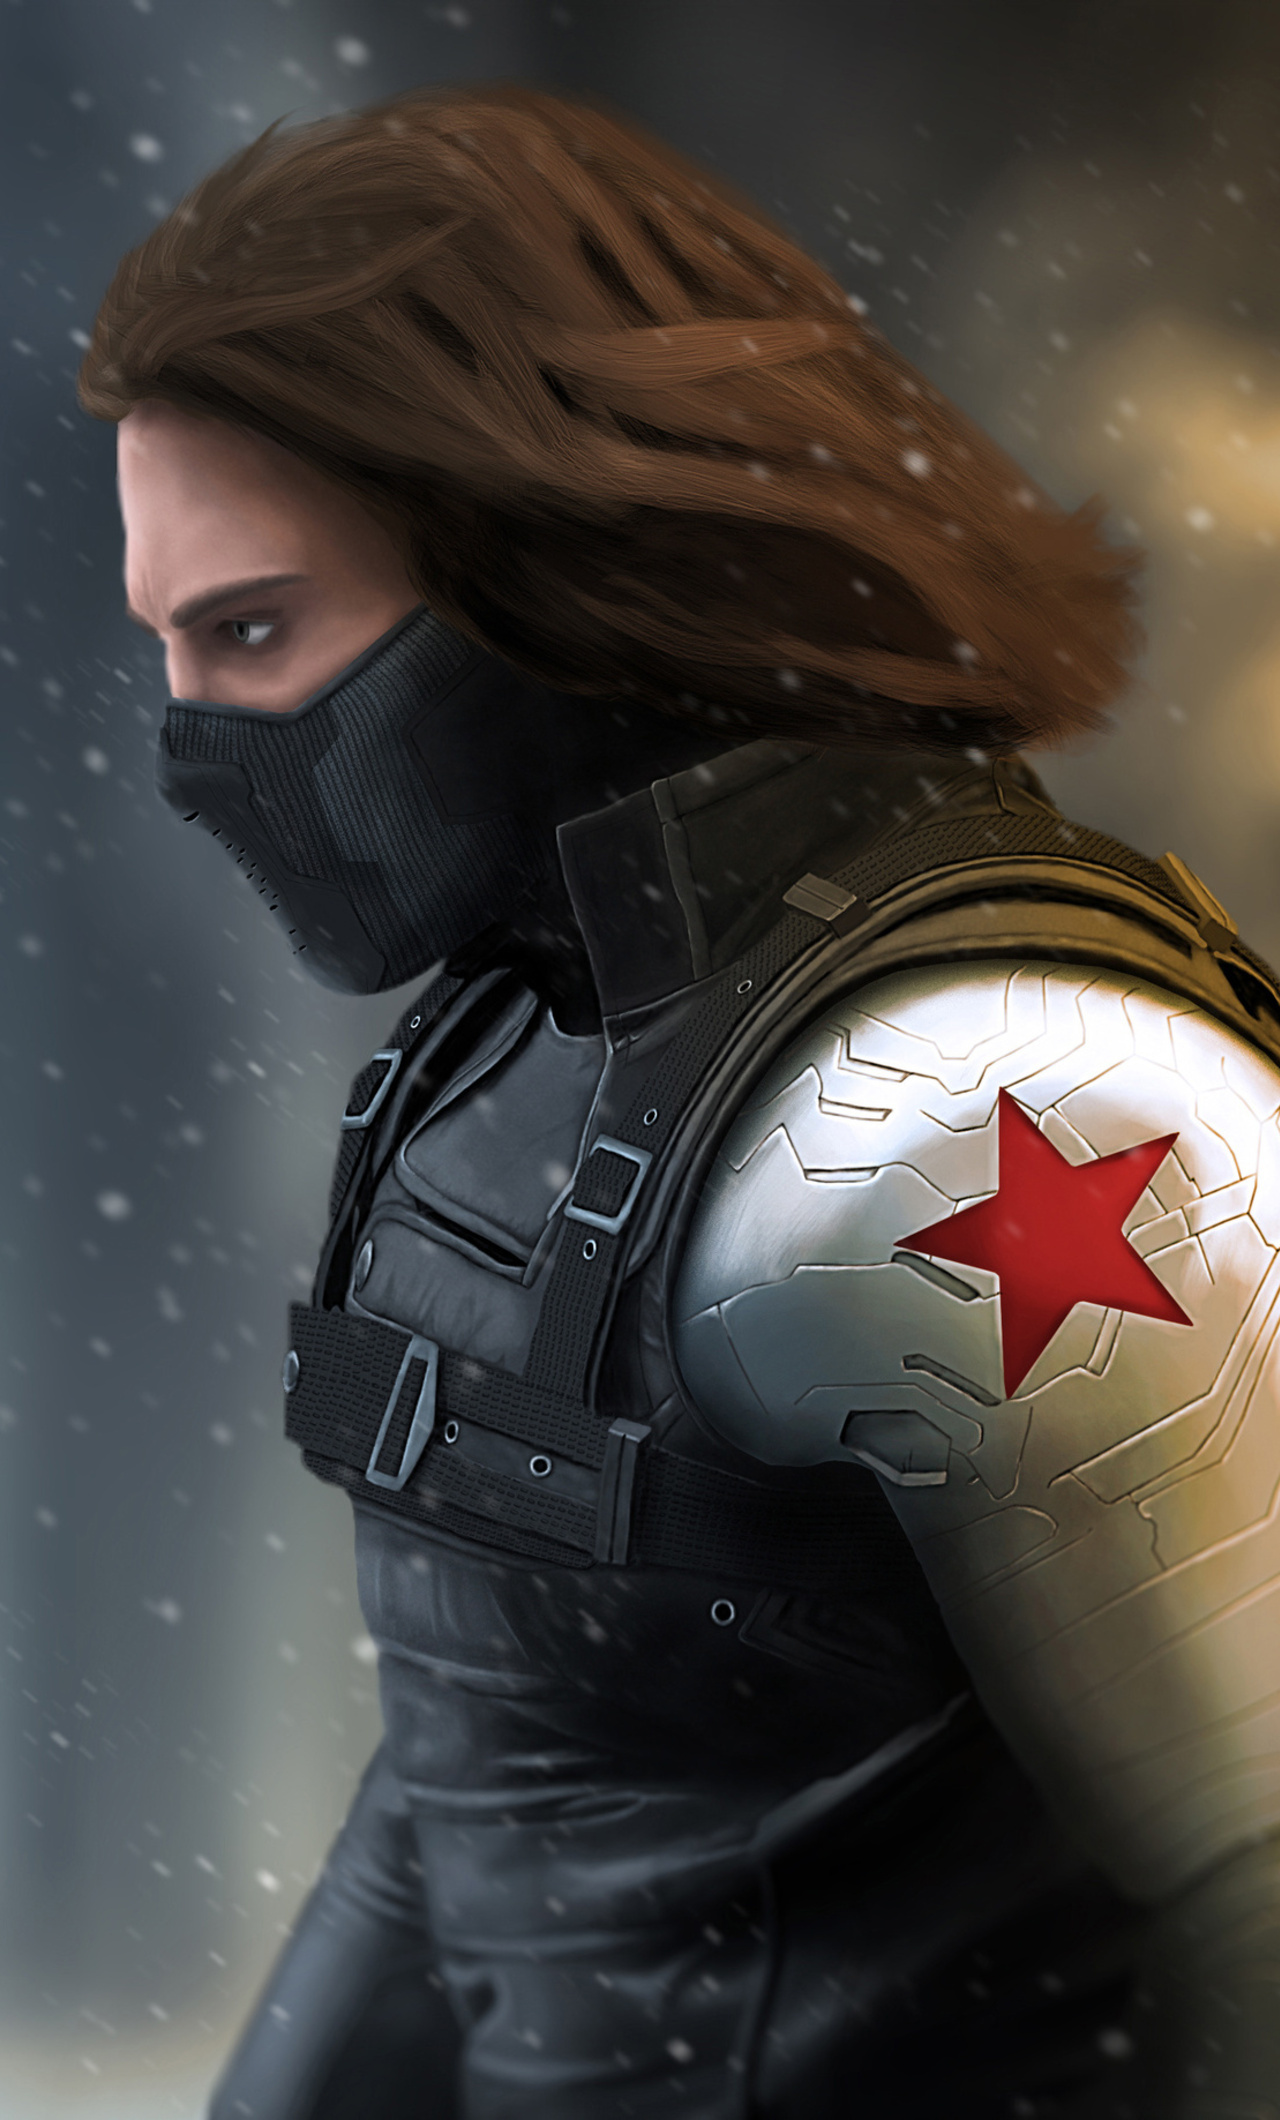 Winter Soldier, 4K iPhone 6 wallpapers, HD 4K images, 1280x2120 HD Handy